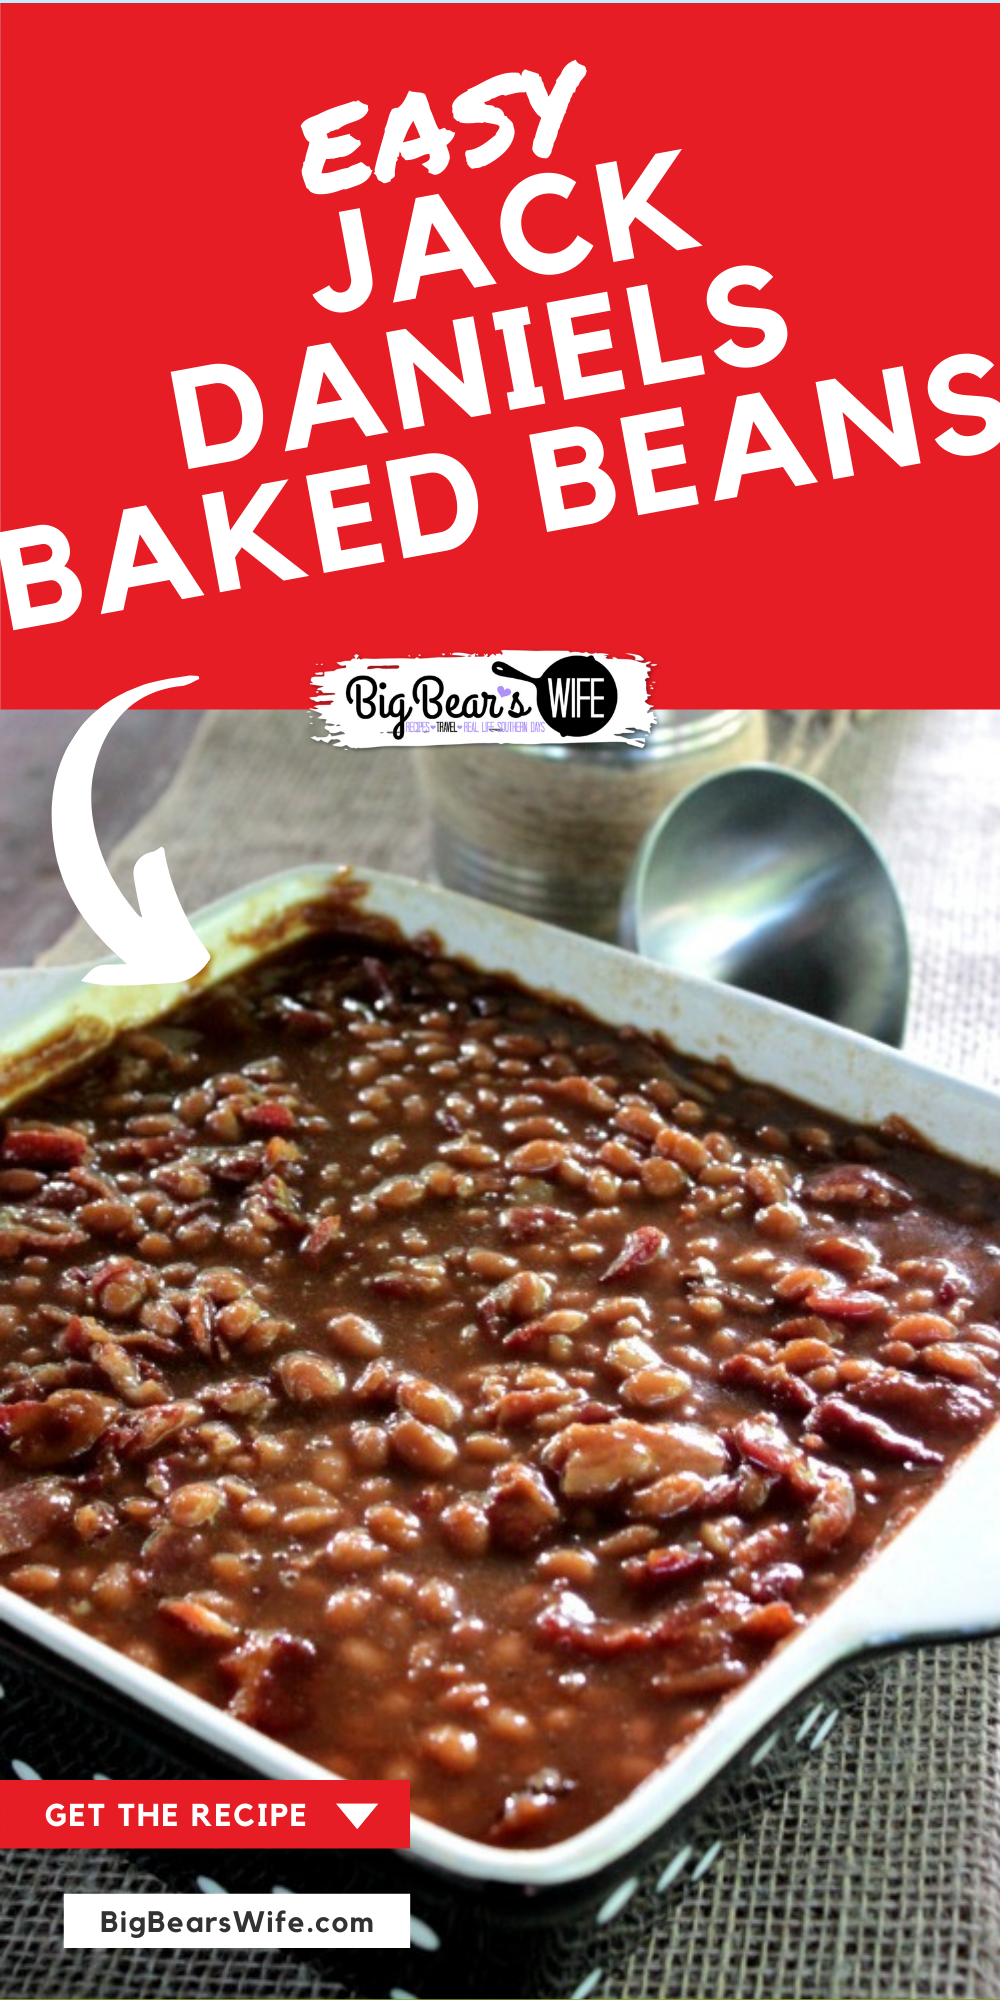 Super easy and tasty Jack Daniels Baked Beans are perfect for cookouts and holidays! Great as a side dish for burgers, hot dogs and anything else you whip up on the grill this summer!  via @bigbearswife